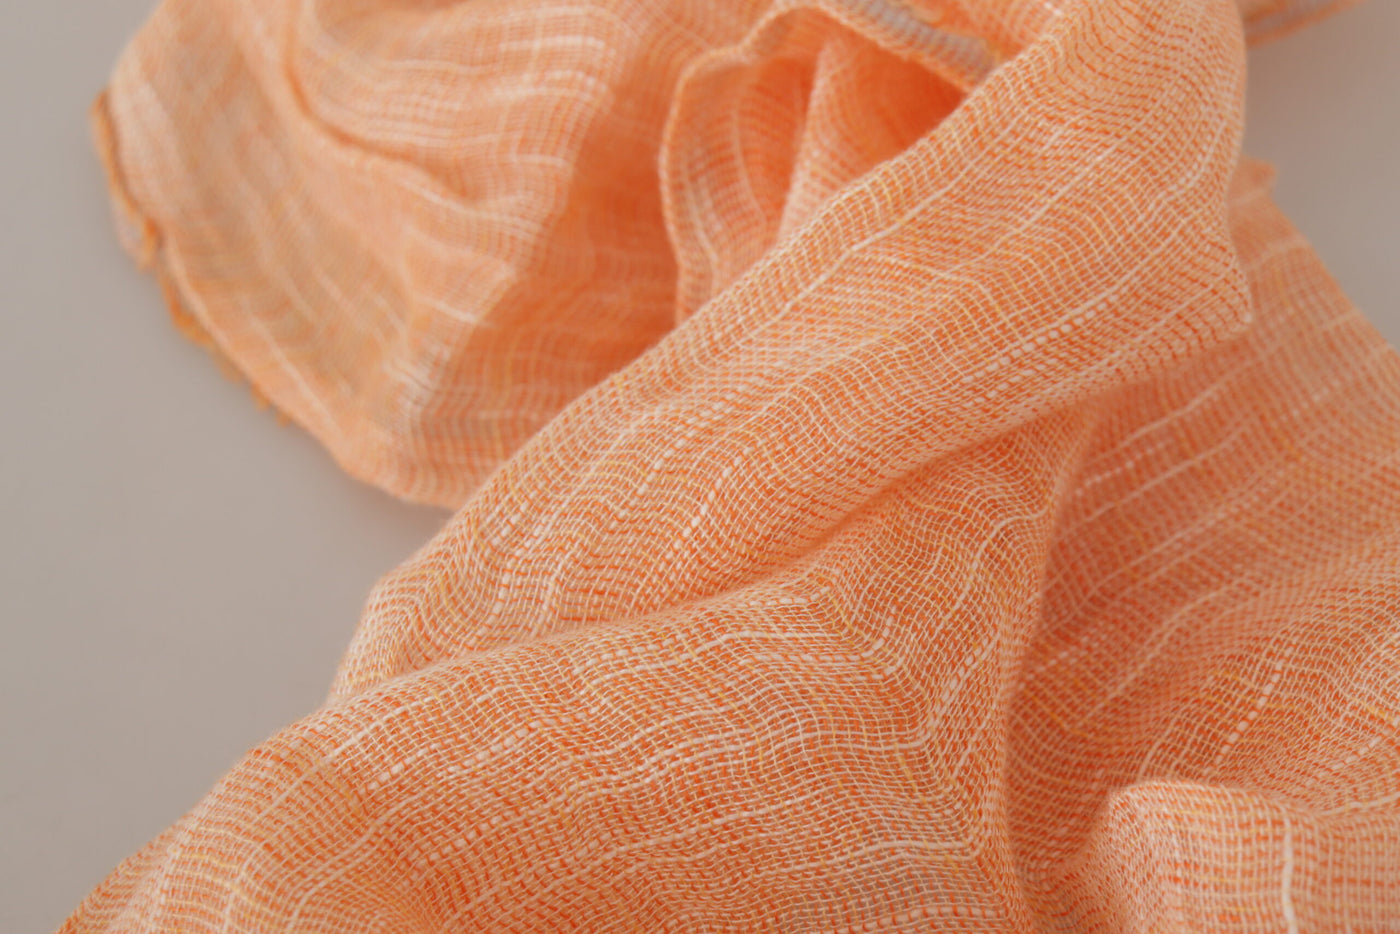 Malo Peach Linen Knitted Shawl Wrap Fringes Scarf